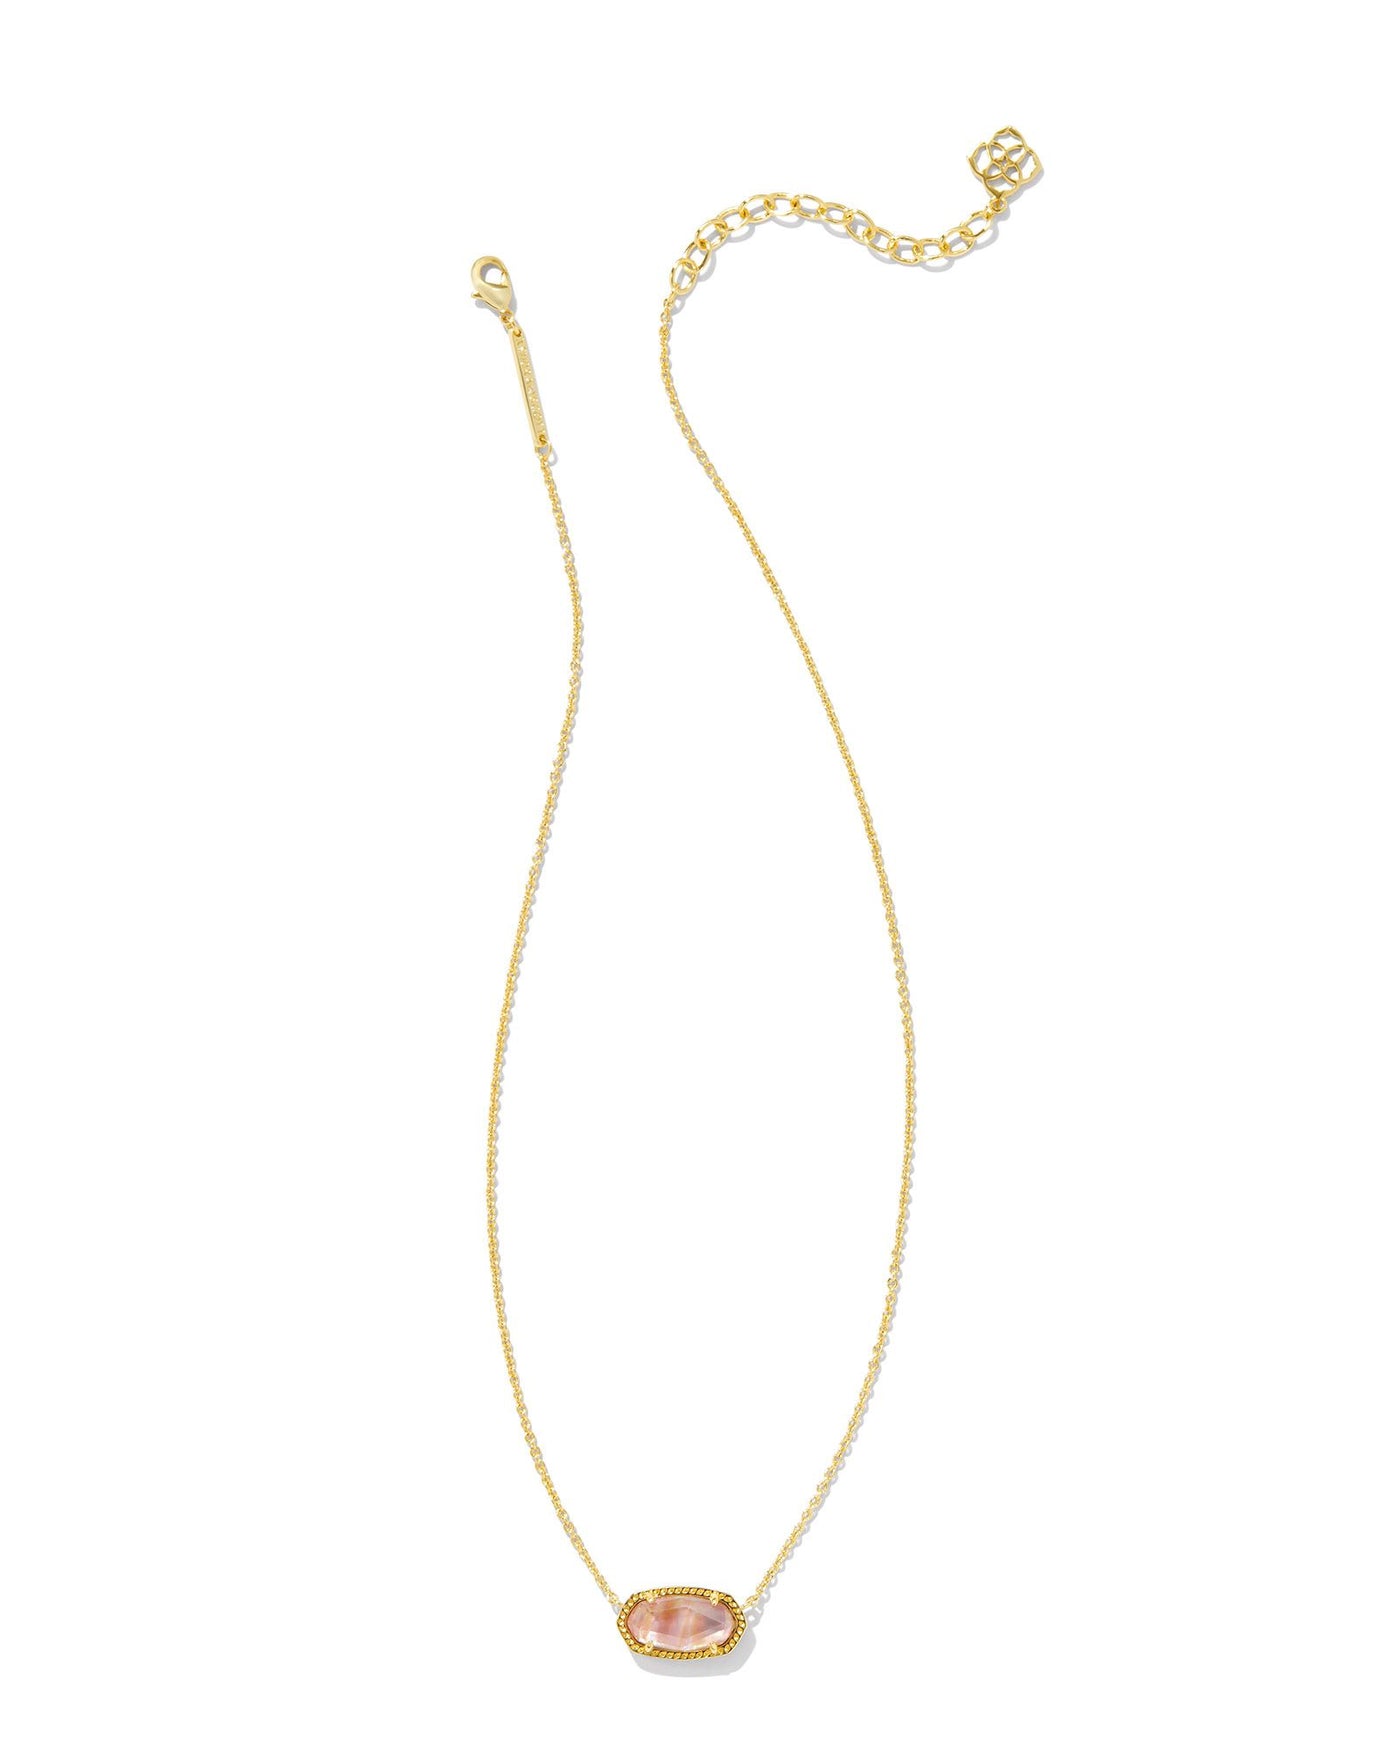 Kendra Scott Elisa Gold Pendant Necklace In Lt Pink Iridescent Abalone-Necklaces-Kendra Scott-Market Street Nest, Fashionable Clothing, Shoes and Home Décor Located in Mabank, TX